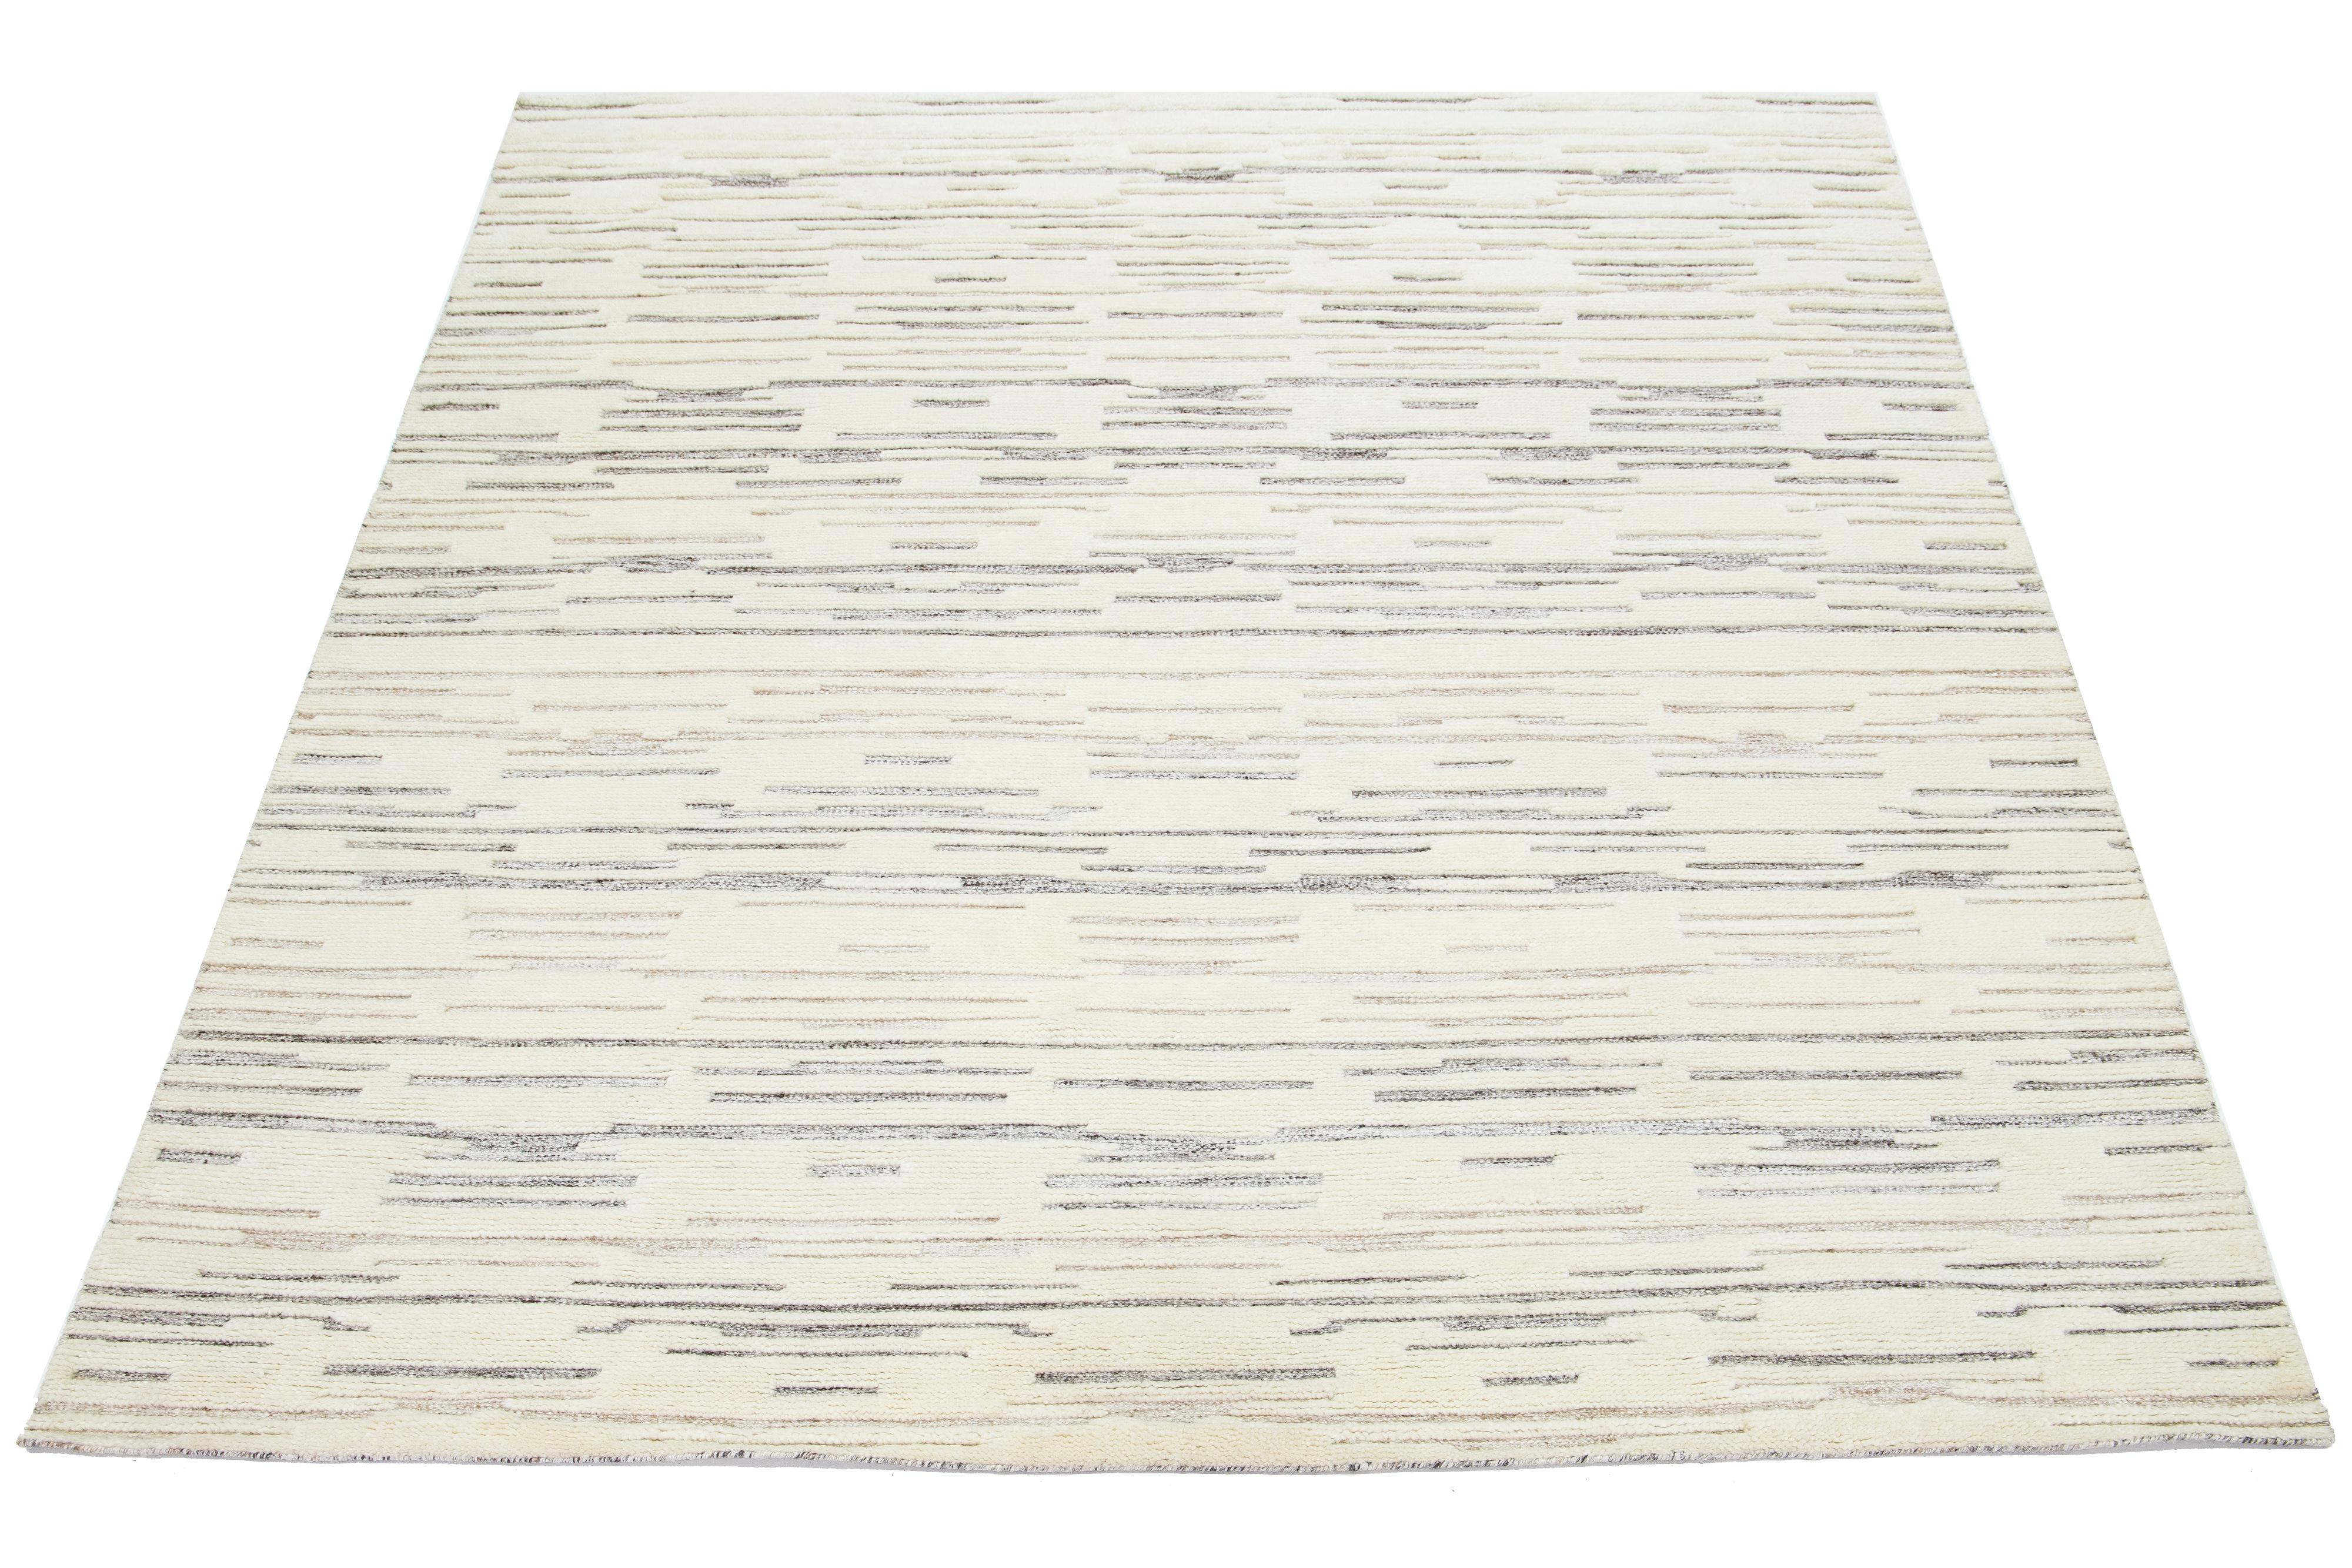 This hand-knotted Moroccan-style wool rug features a beautiful modern design with a natural ivory background. It showcases a stunning striped pattern in gray and brown.

This rug measures 8' x 10'.